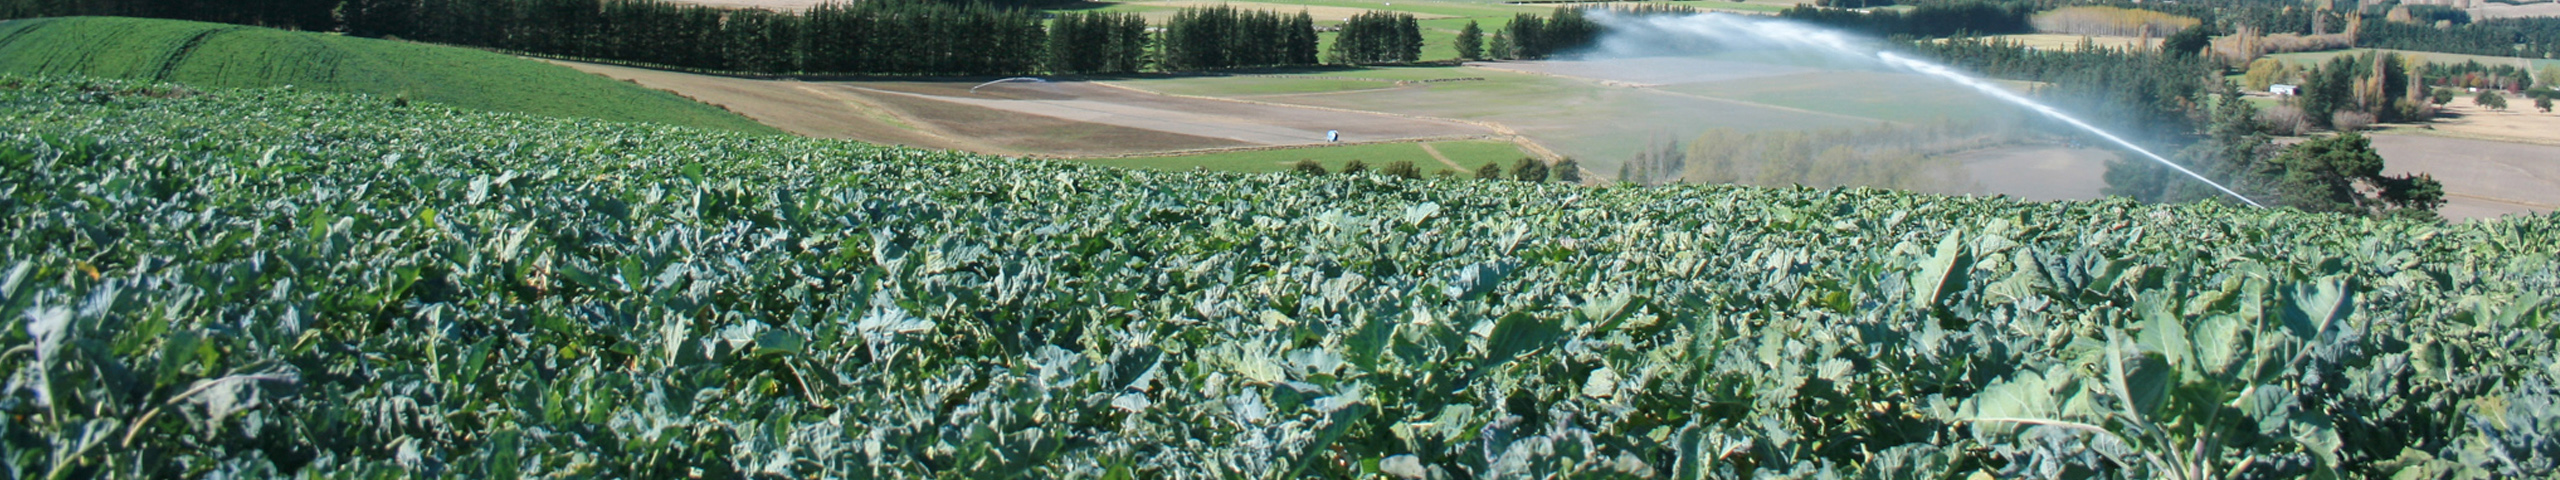 A brassica crop growing on a hillside with rolling paddocks and mountains in the background